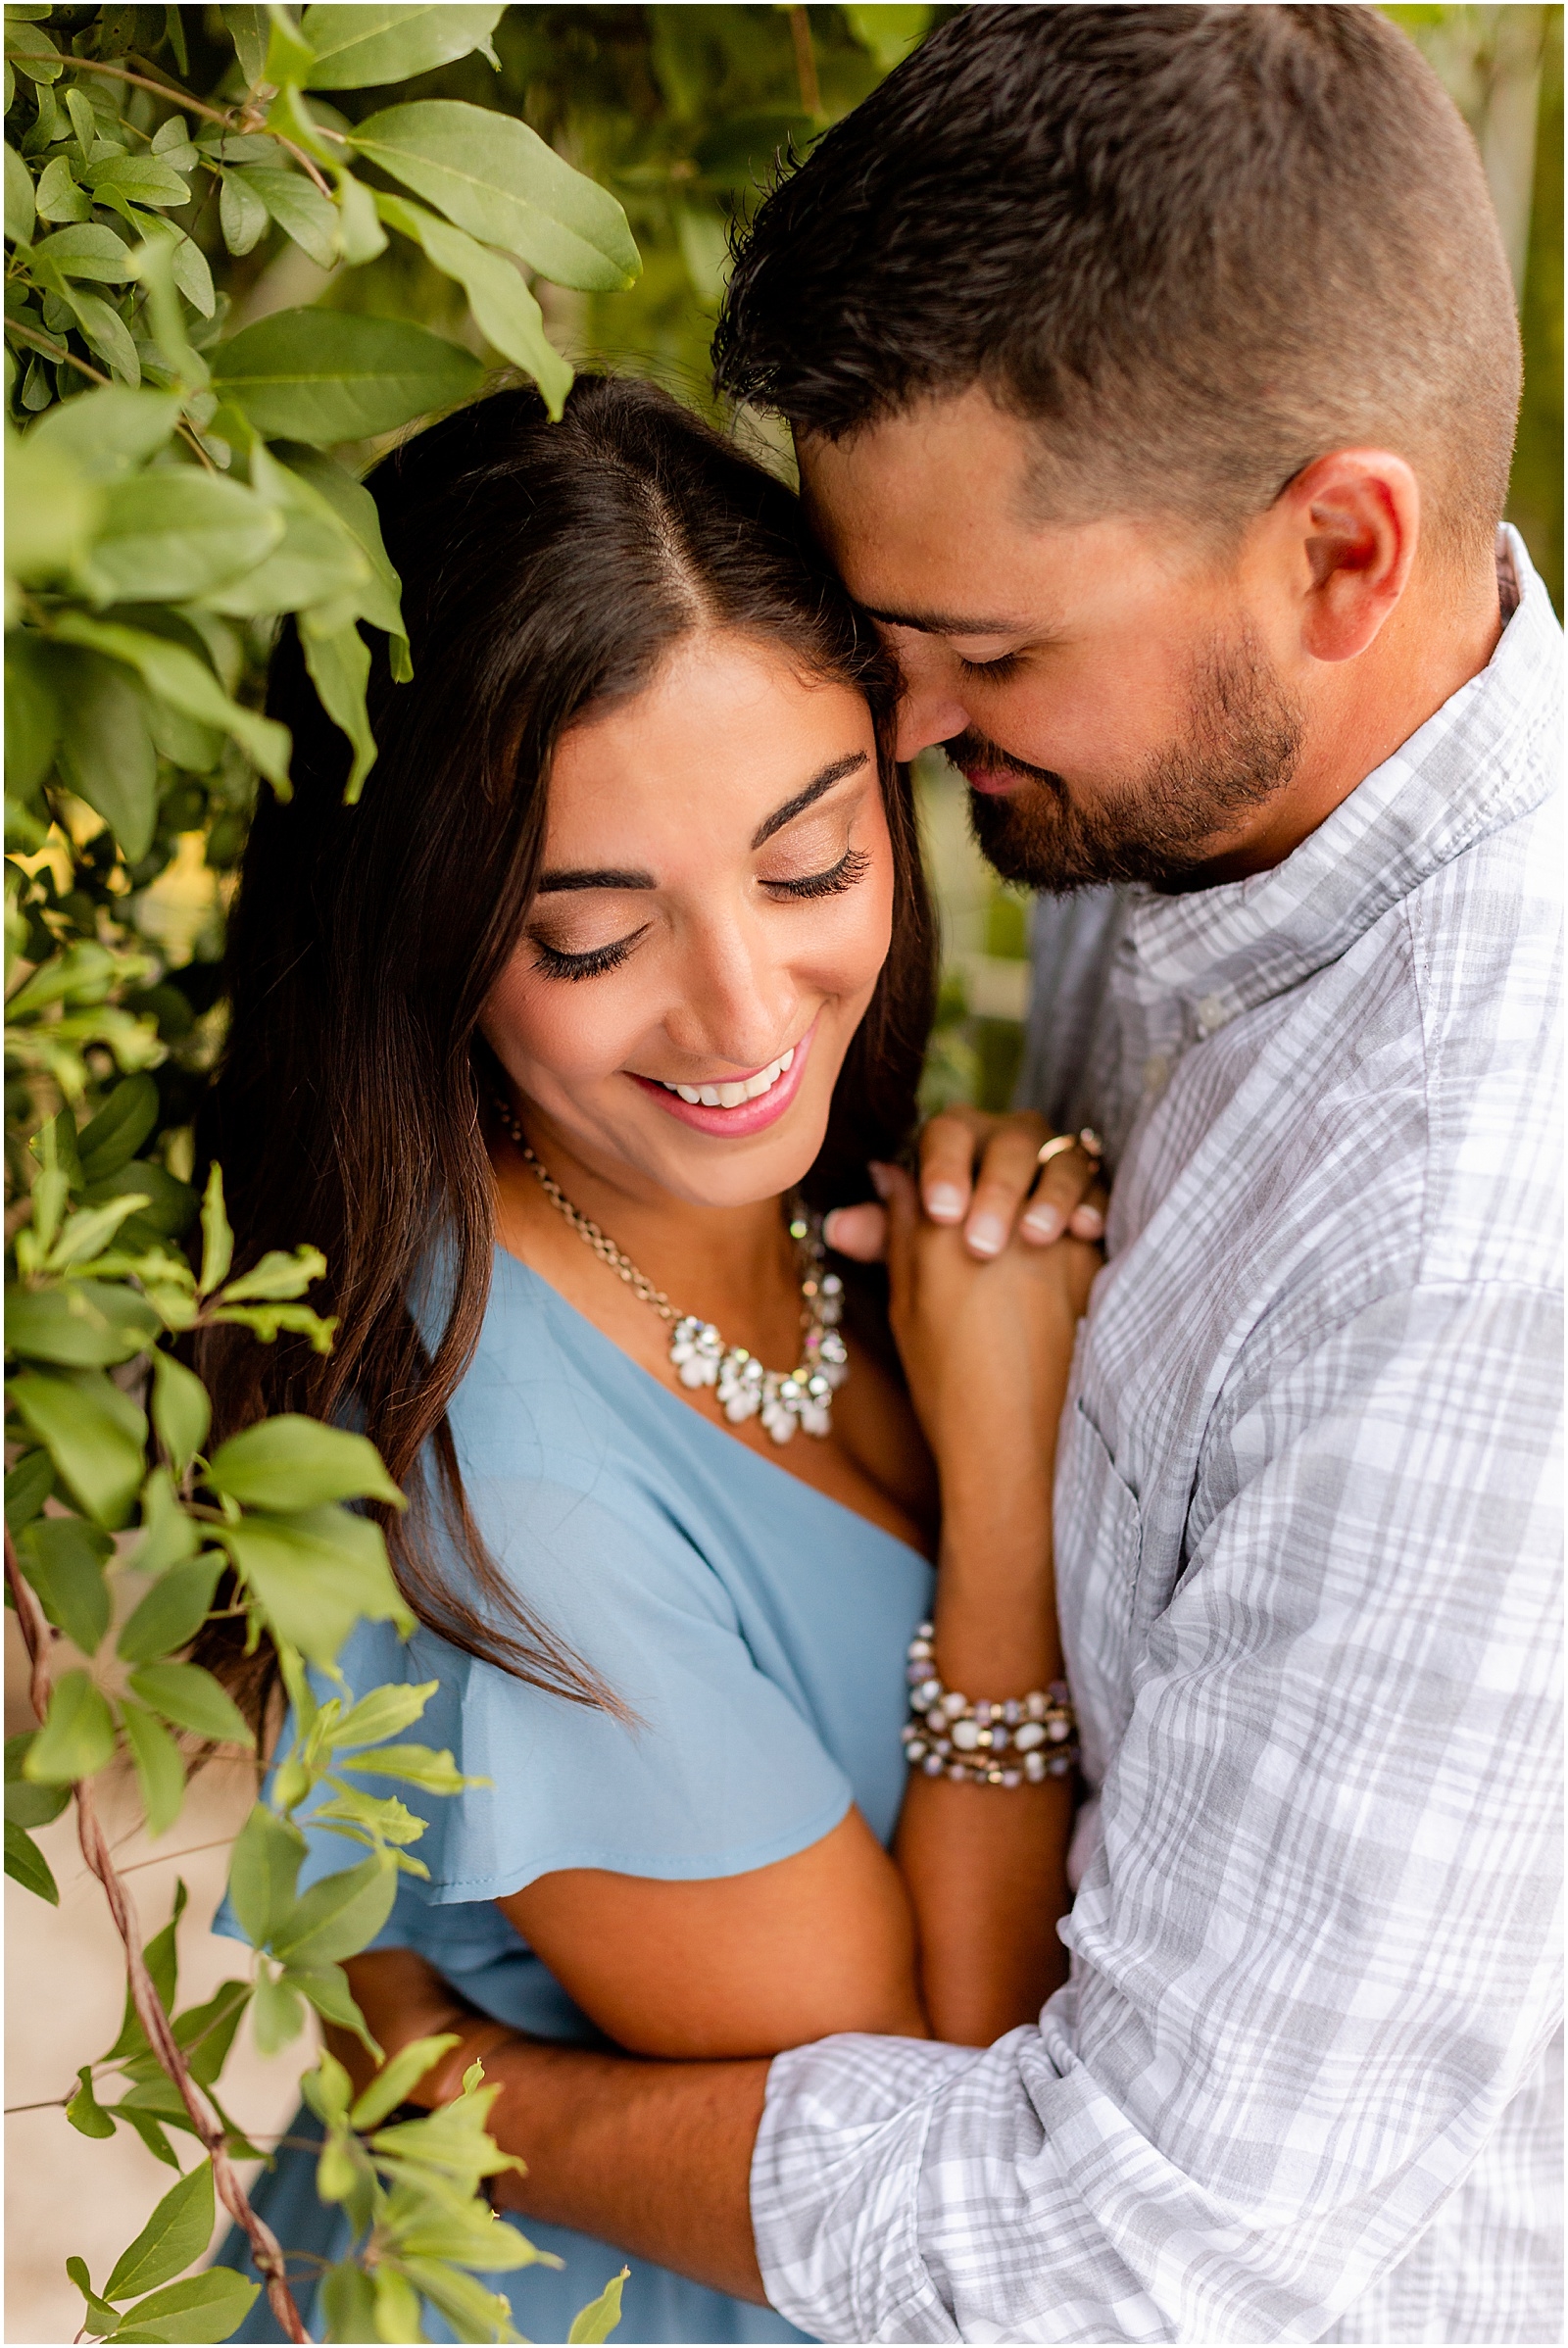 Sally and Andrew's Anniversary Session in New Harmony |Bret and Brandie Photography0011.jpg